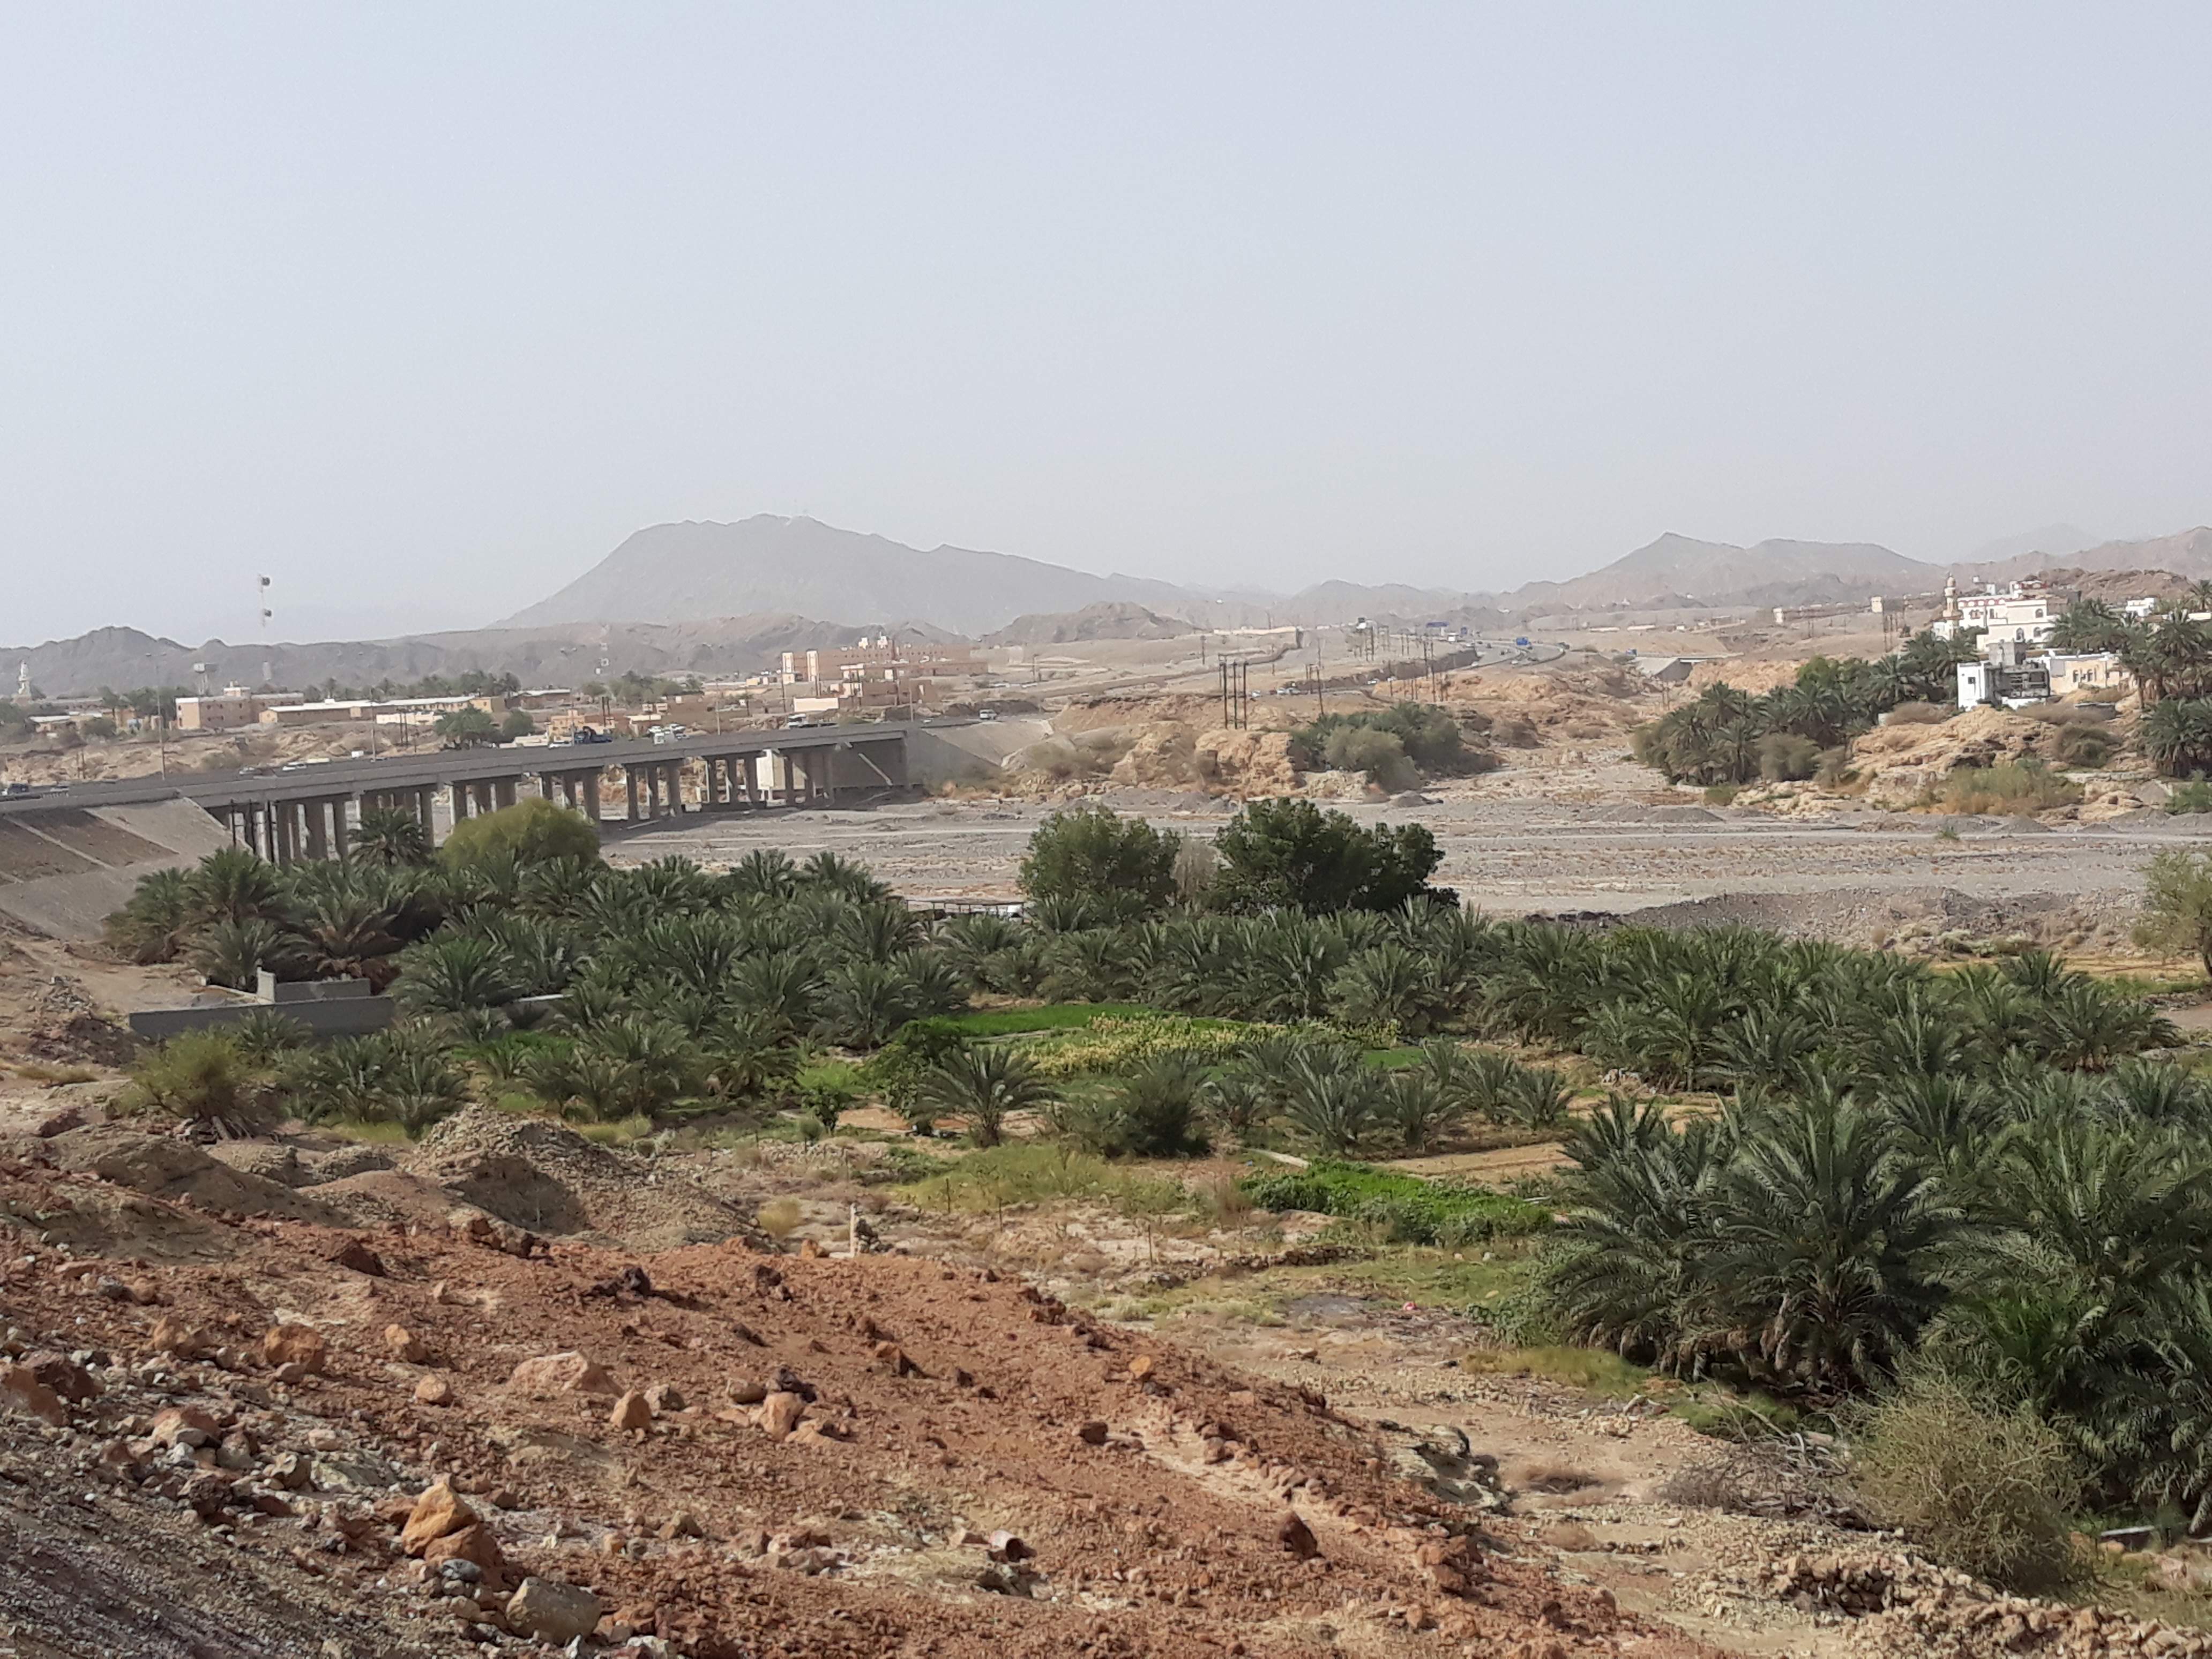 A view of empty Wadi (river) Fanja